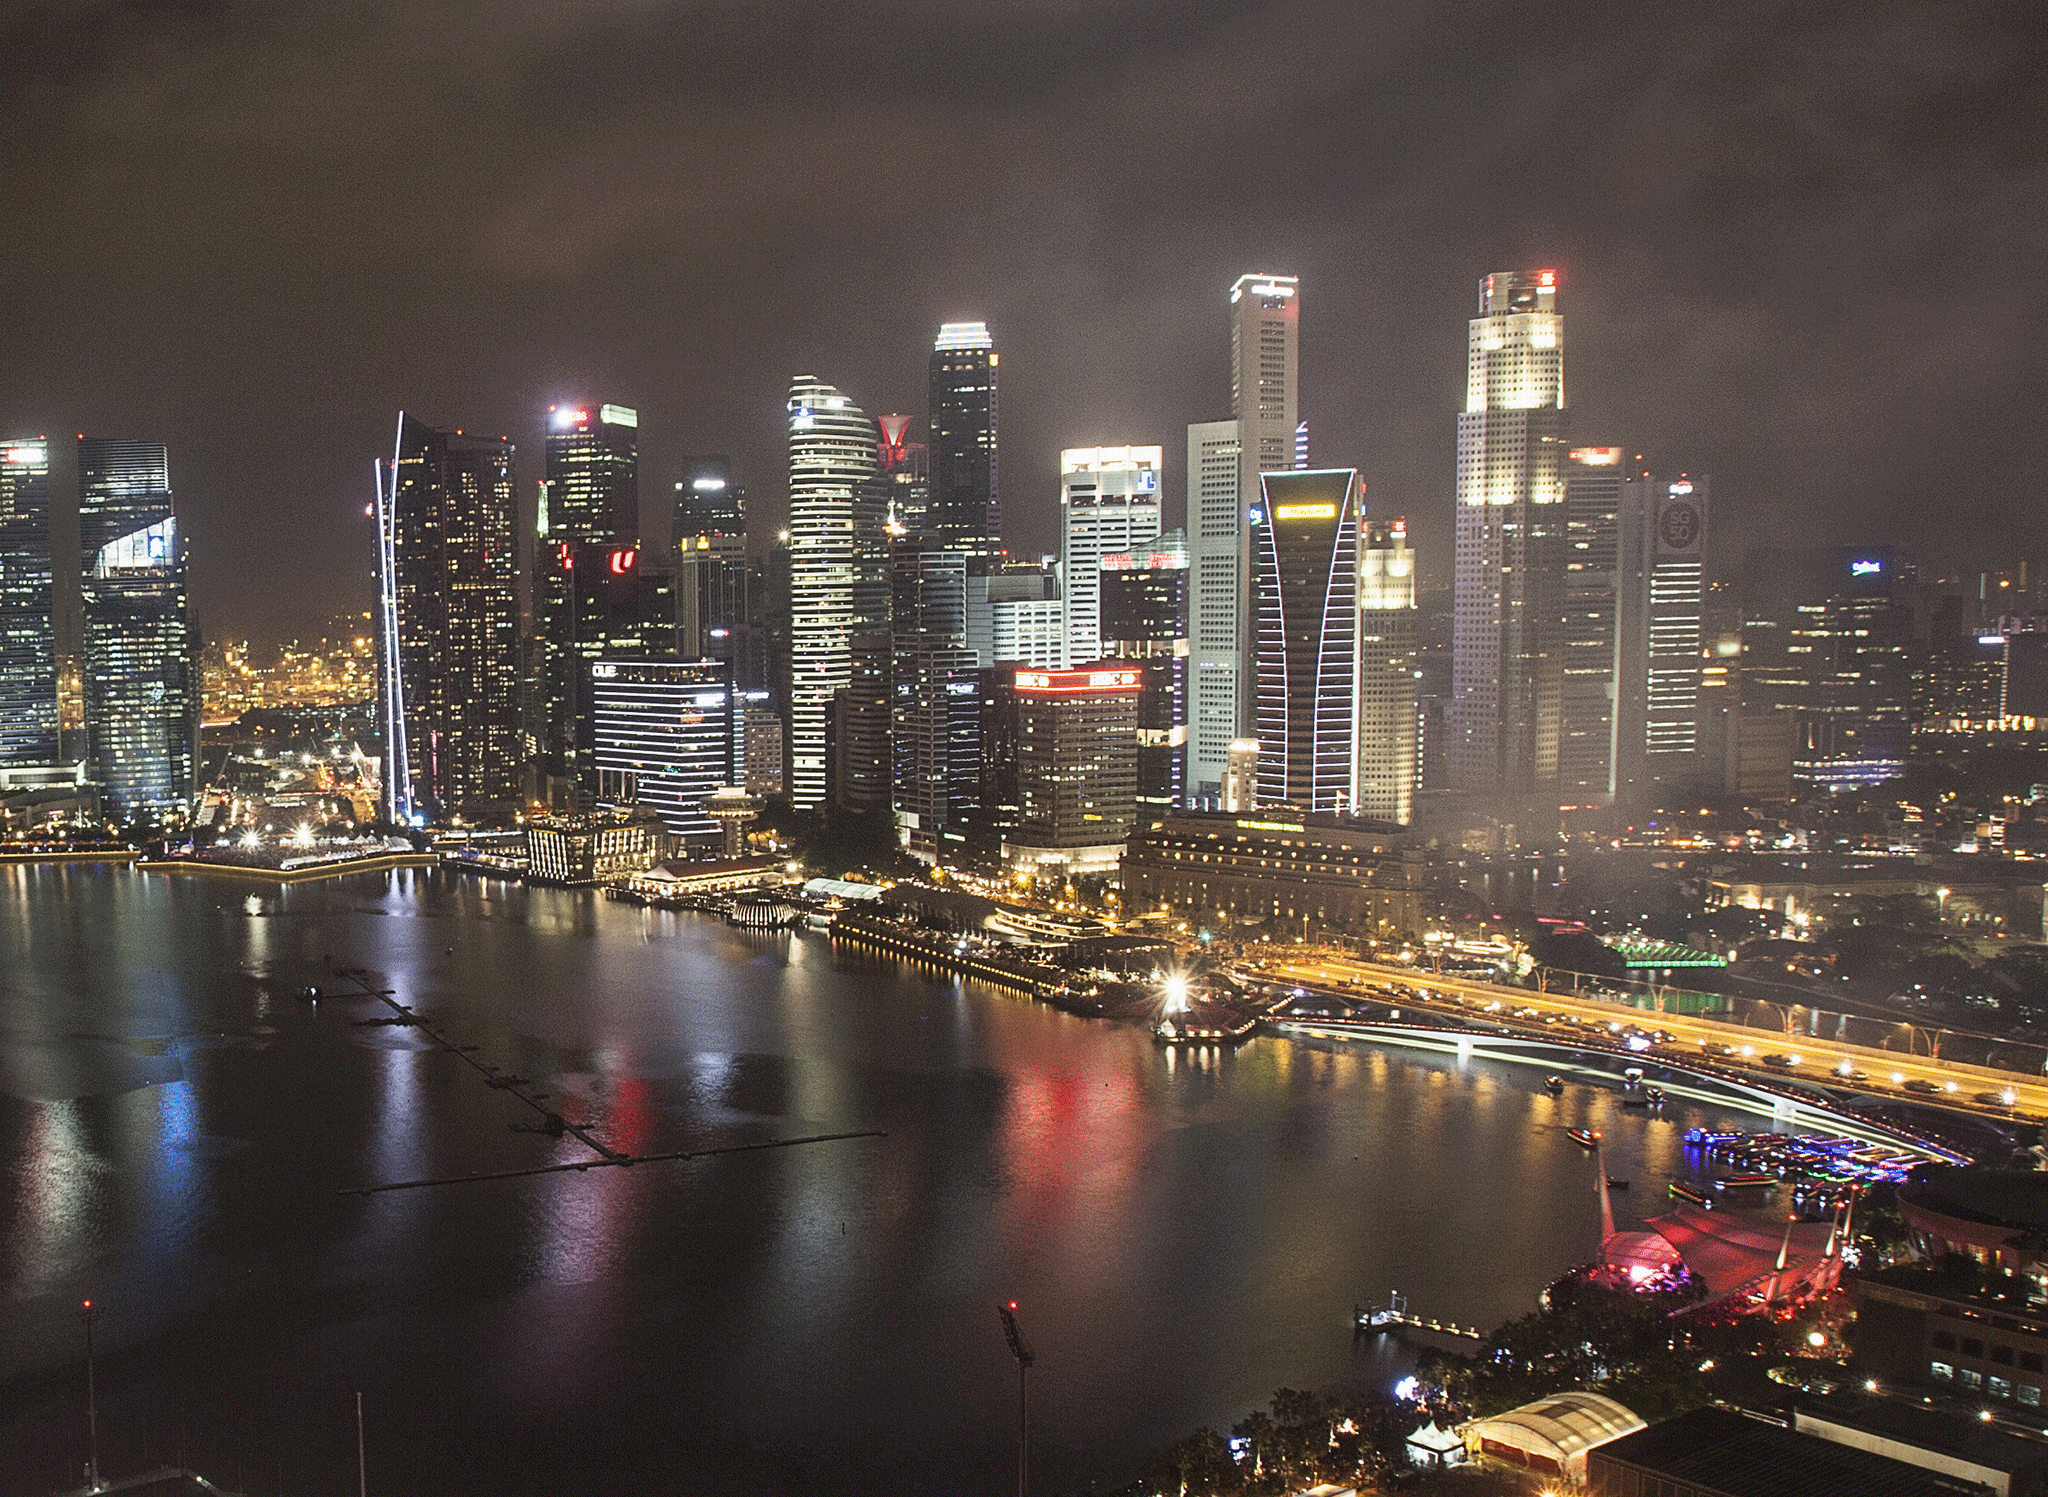 Singapore-based wealth managers say their clients are increasingly looking towards private equity investments